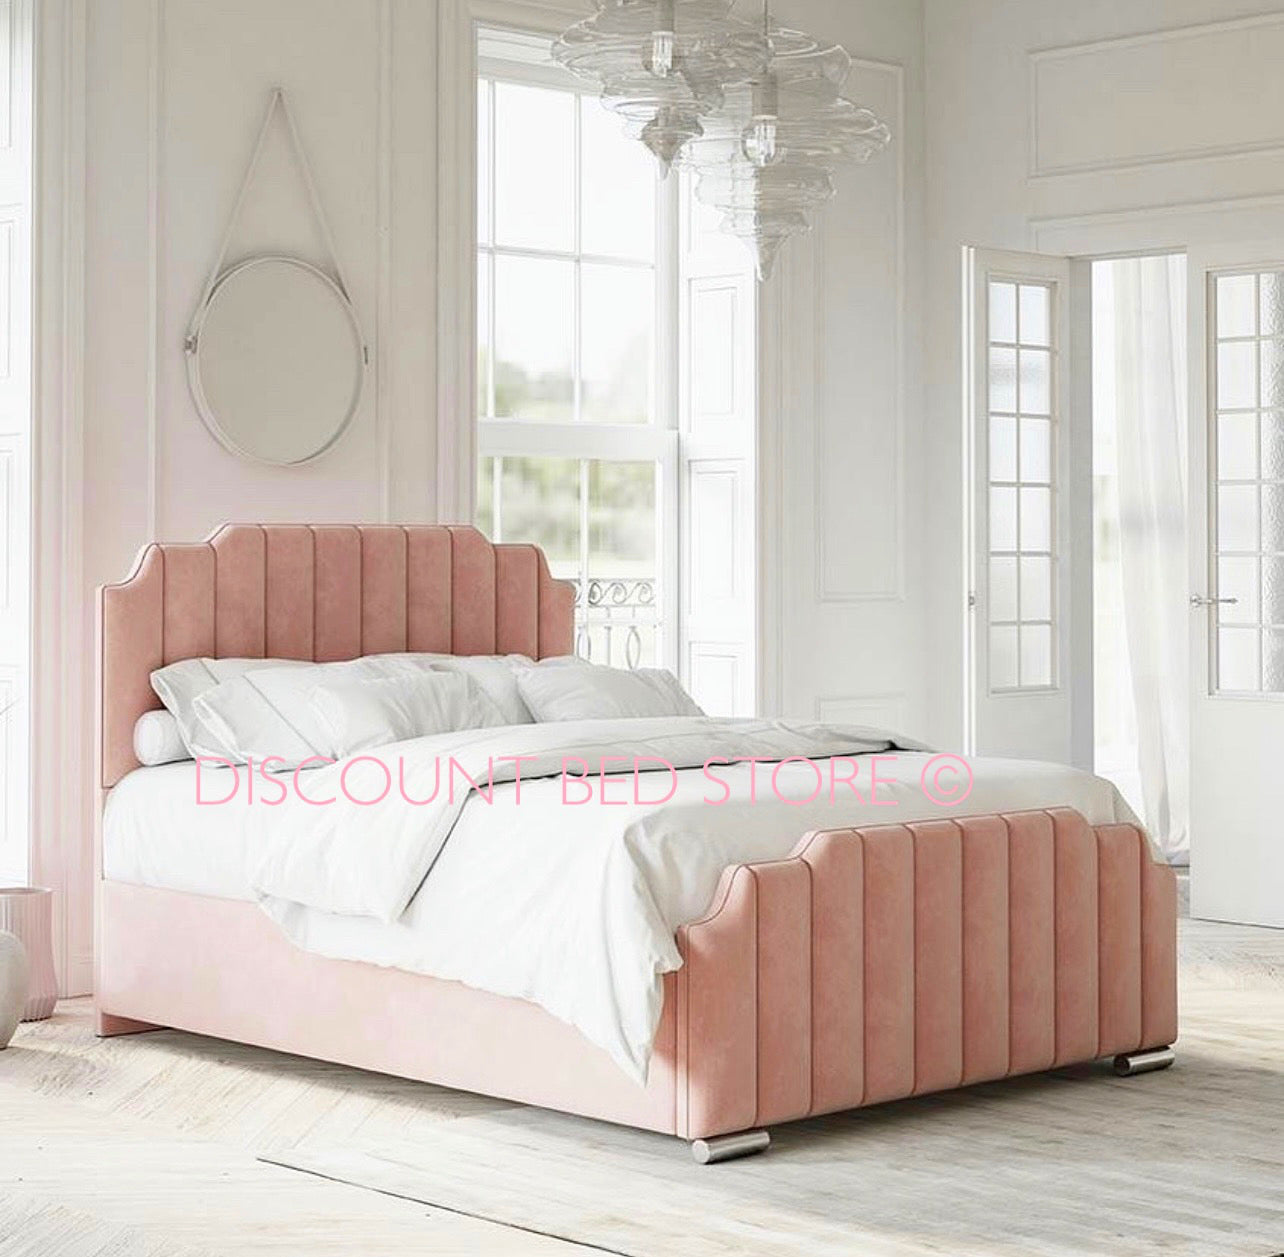 The Manhattan Upholstered Fabric Bed